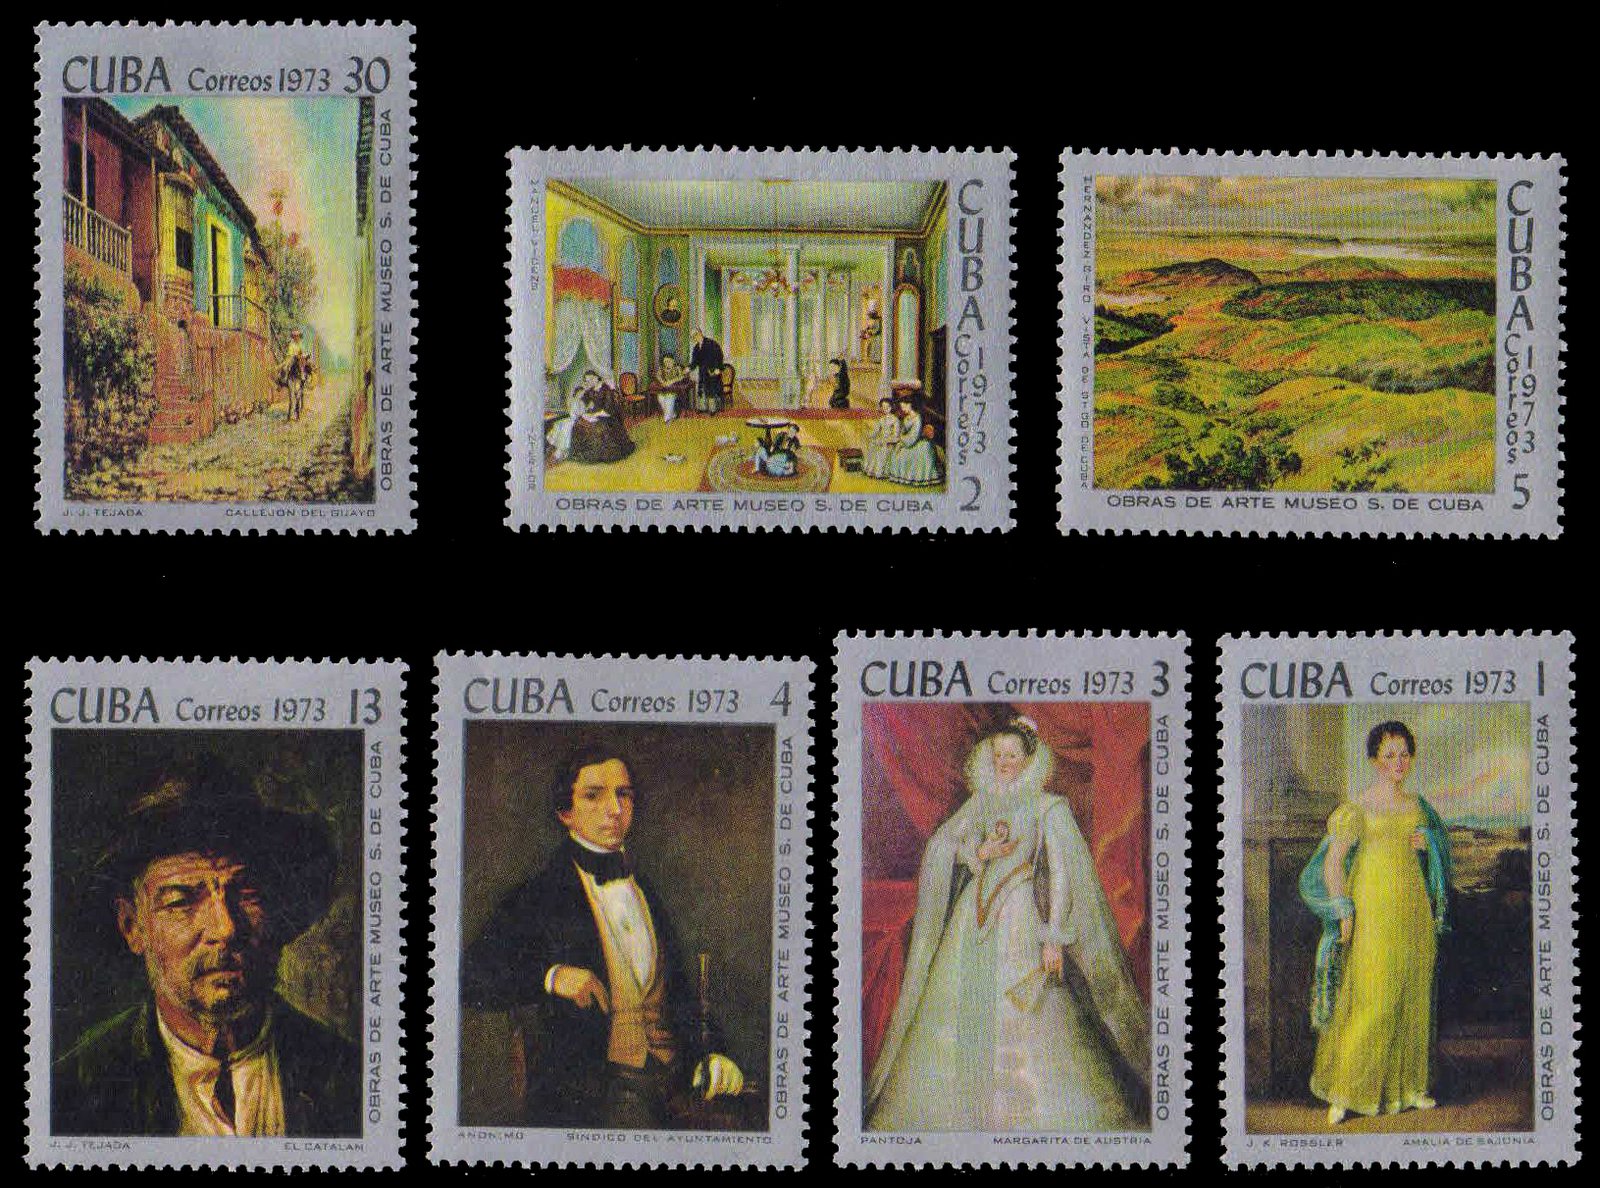 CUBA 1973-National Museum Paintings, 8th Series, Set of 7, MNH, S.G. 2048-54